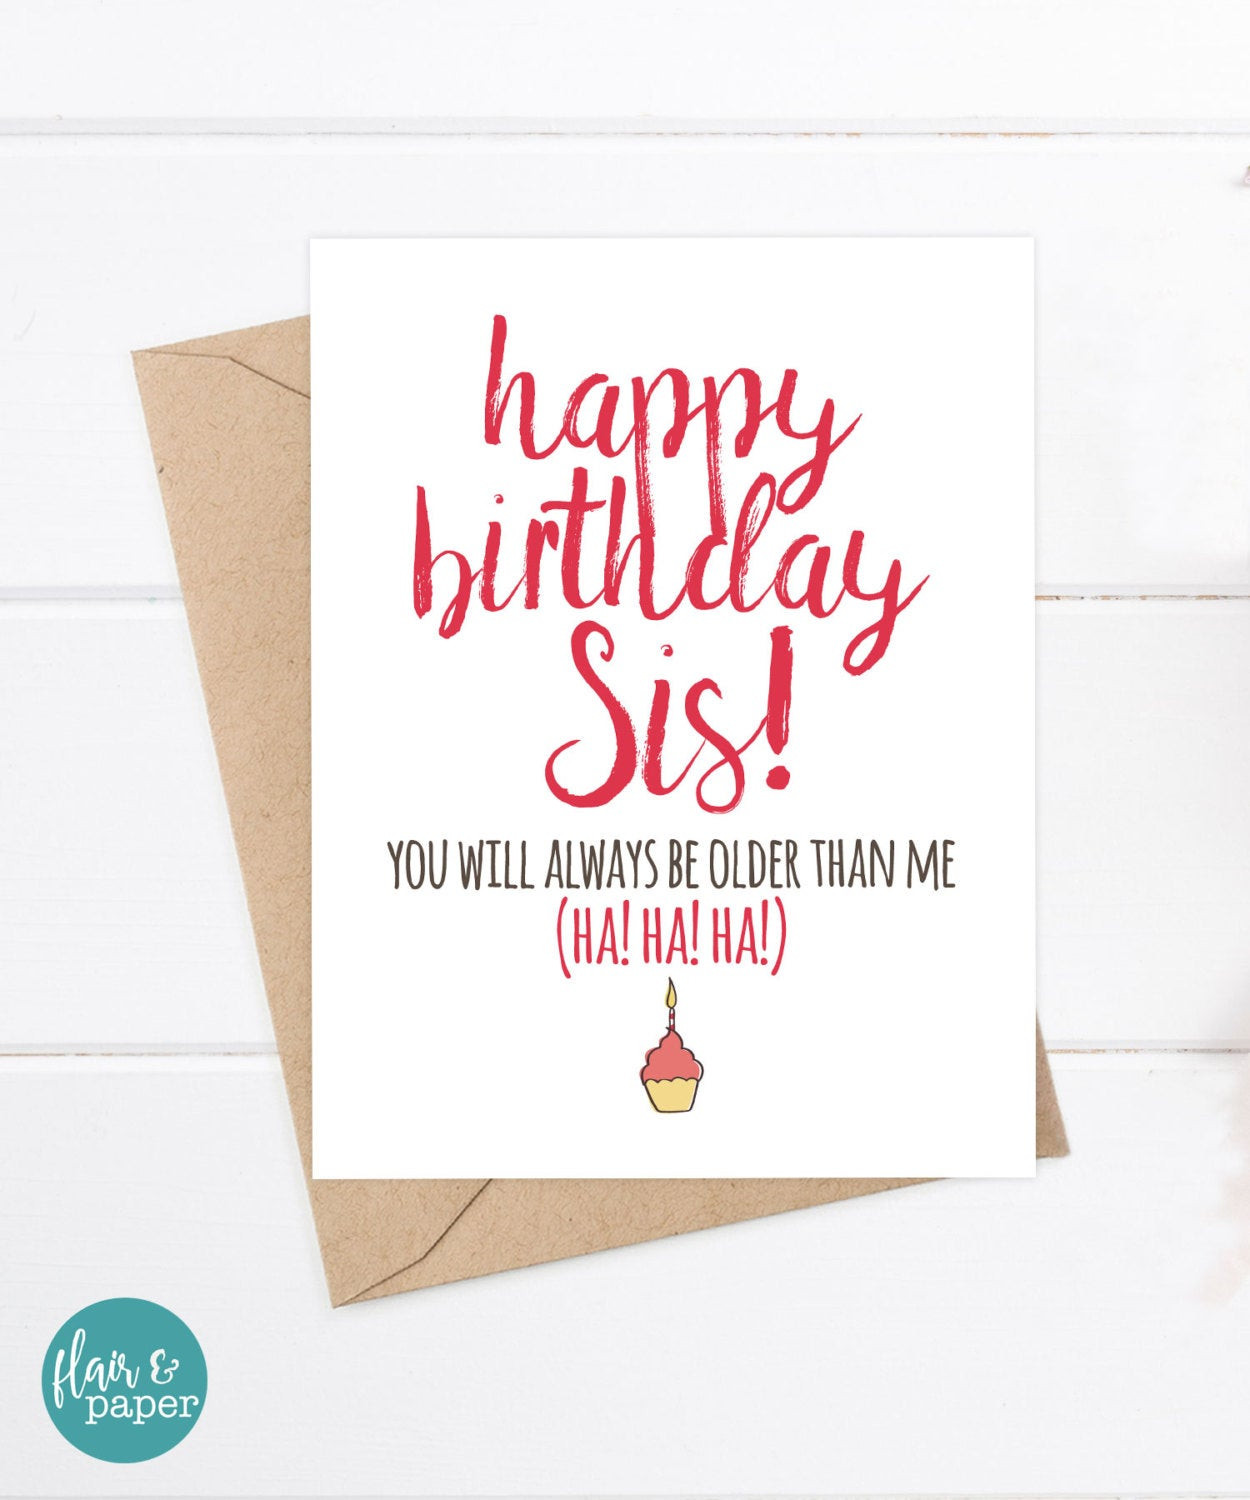 Happy Birthday Sister Funny Cards
 Sister Birthday Card Funny Sister Birthday Birthday Card